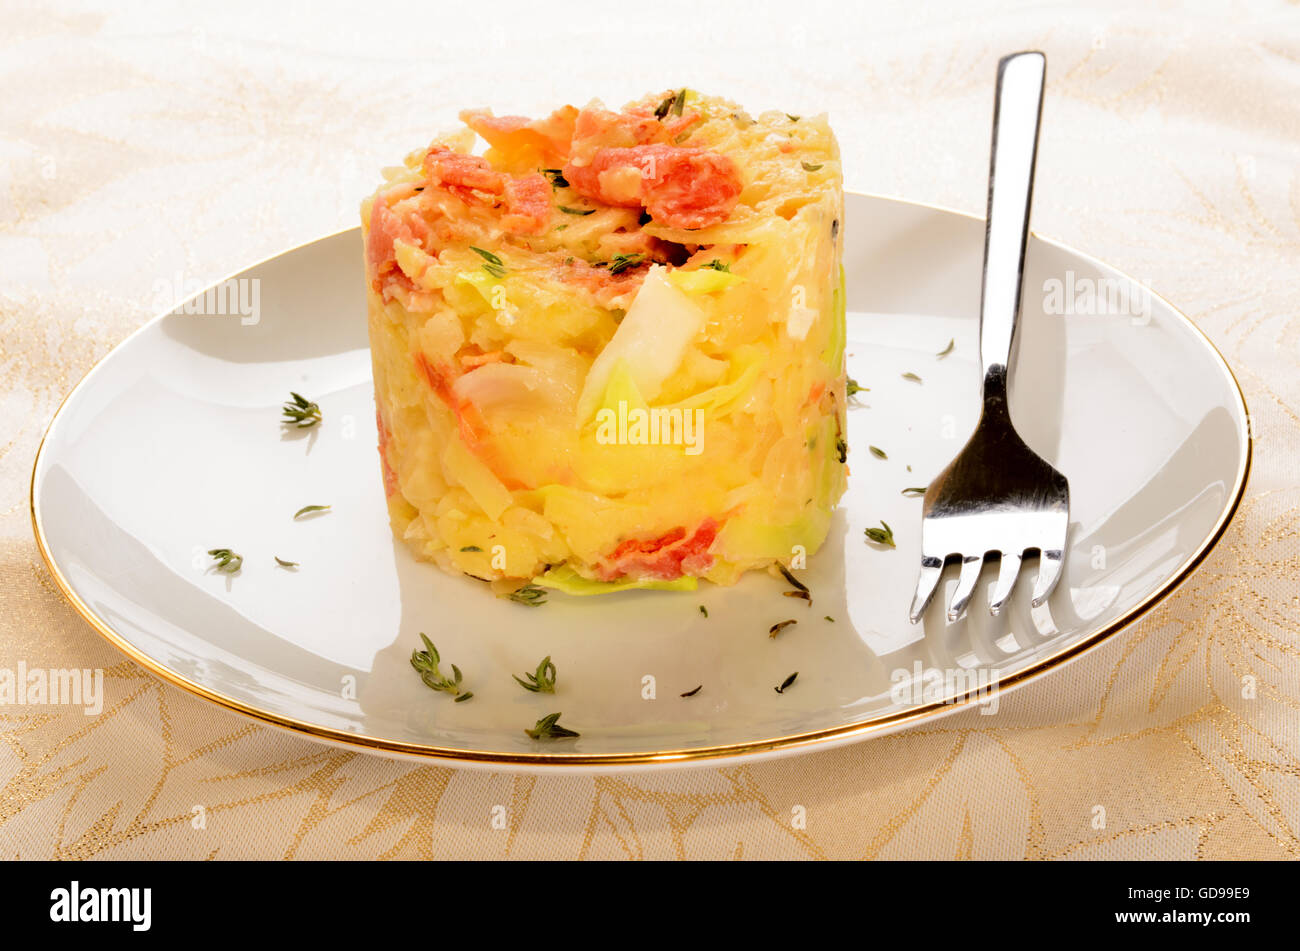 irish colcannon, made with mashed potato, cabbage, grilled bacon and crushed peppercorn served on a plate Stock Photo